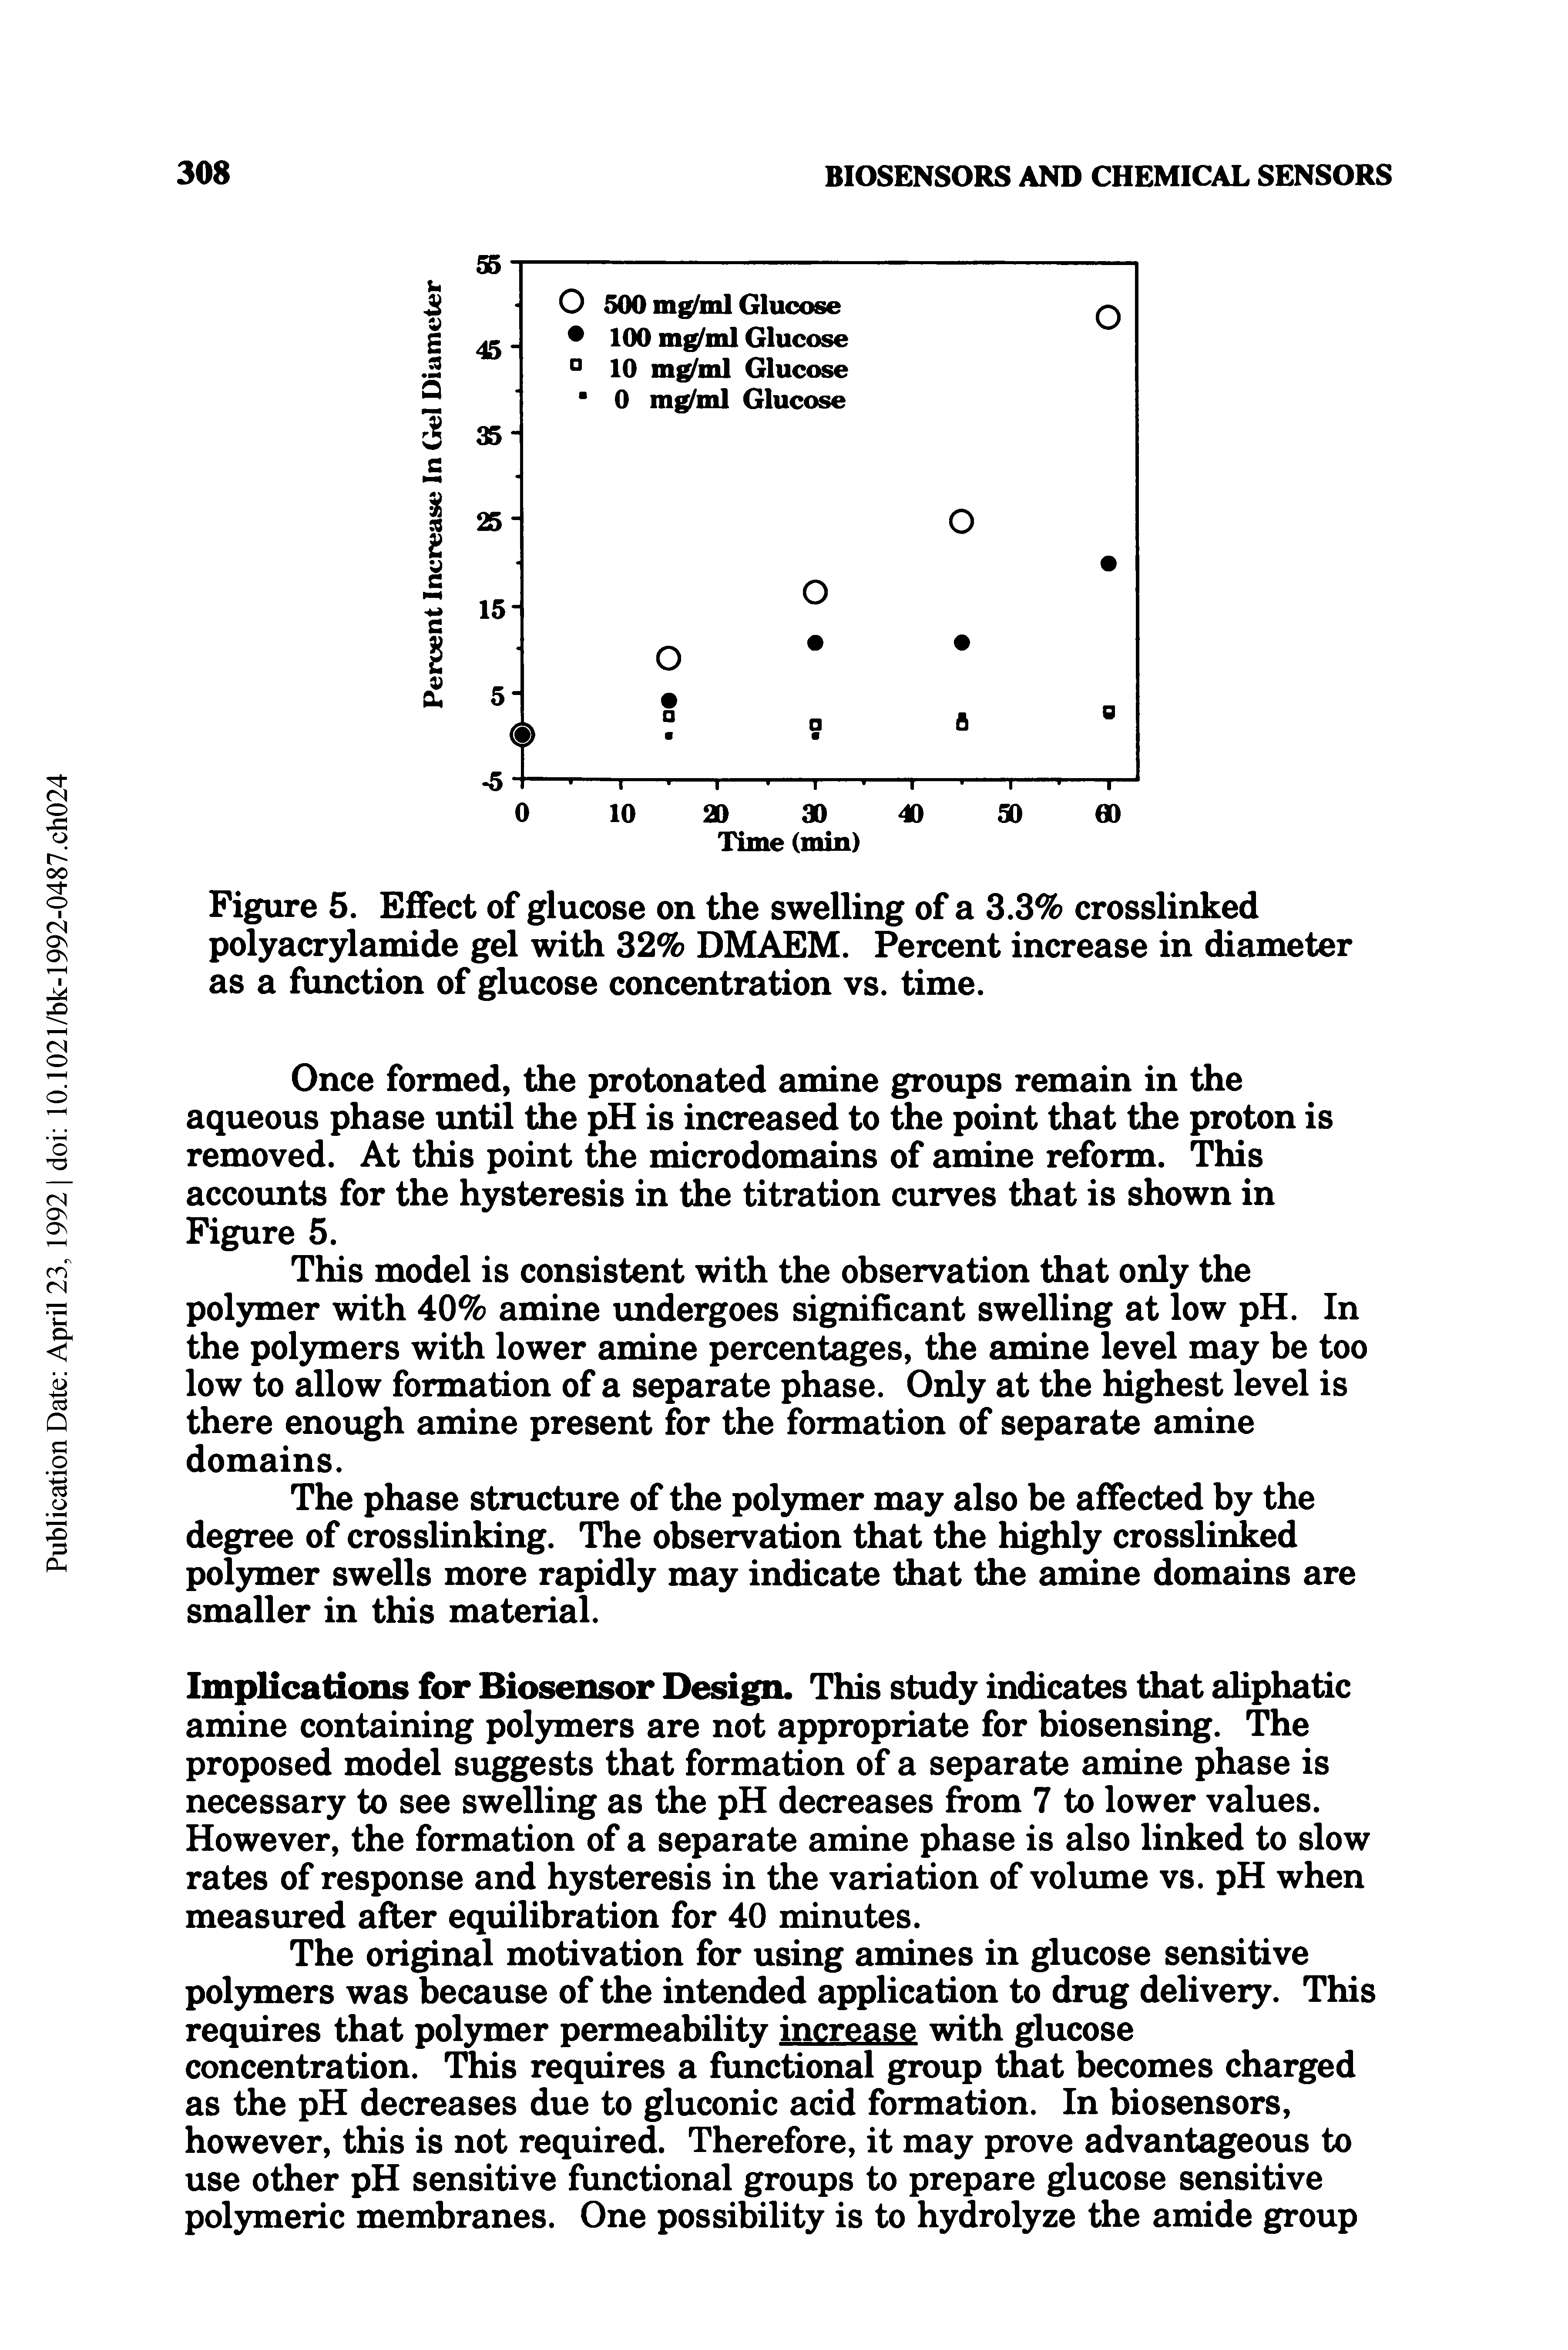 Figure 5. Effect of glucose on the swelling of a 3.3% crosslinked polyacrylamide gel with 32% DMAEM. Percent increase in diameter as a function of glucose concentration vs. time.